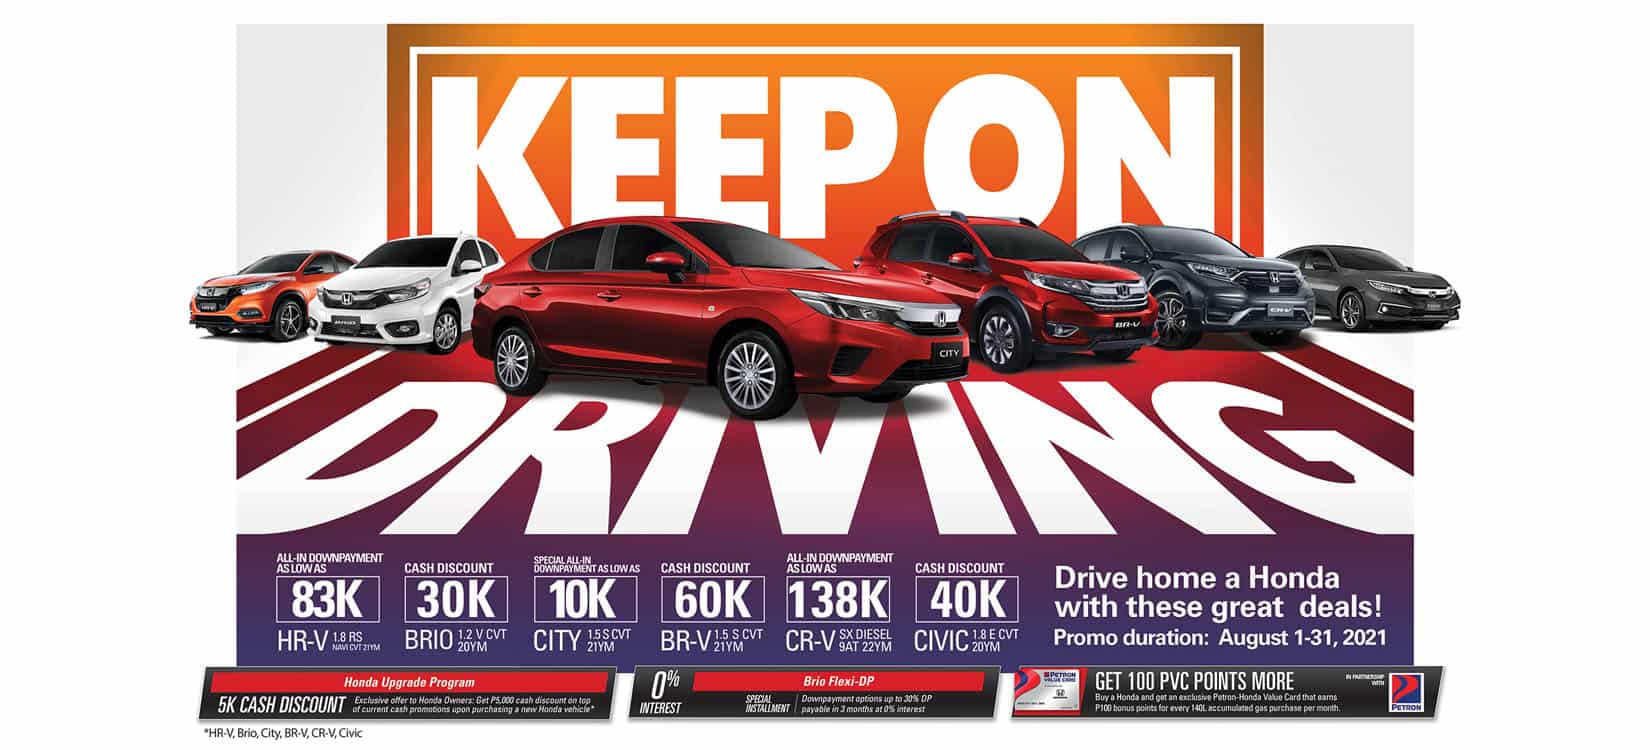 Honda offers exclusive deals and exciting promos this August